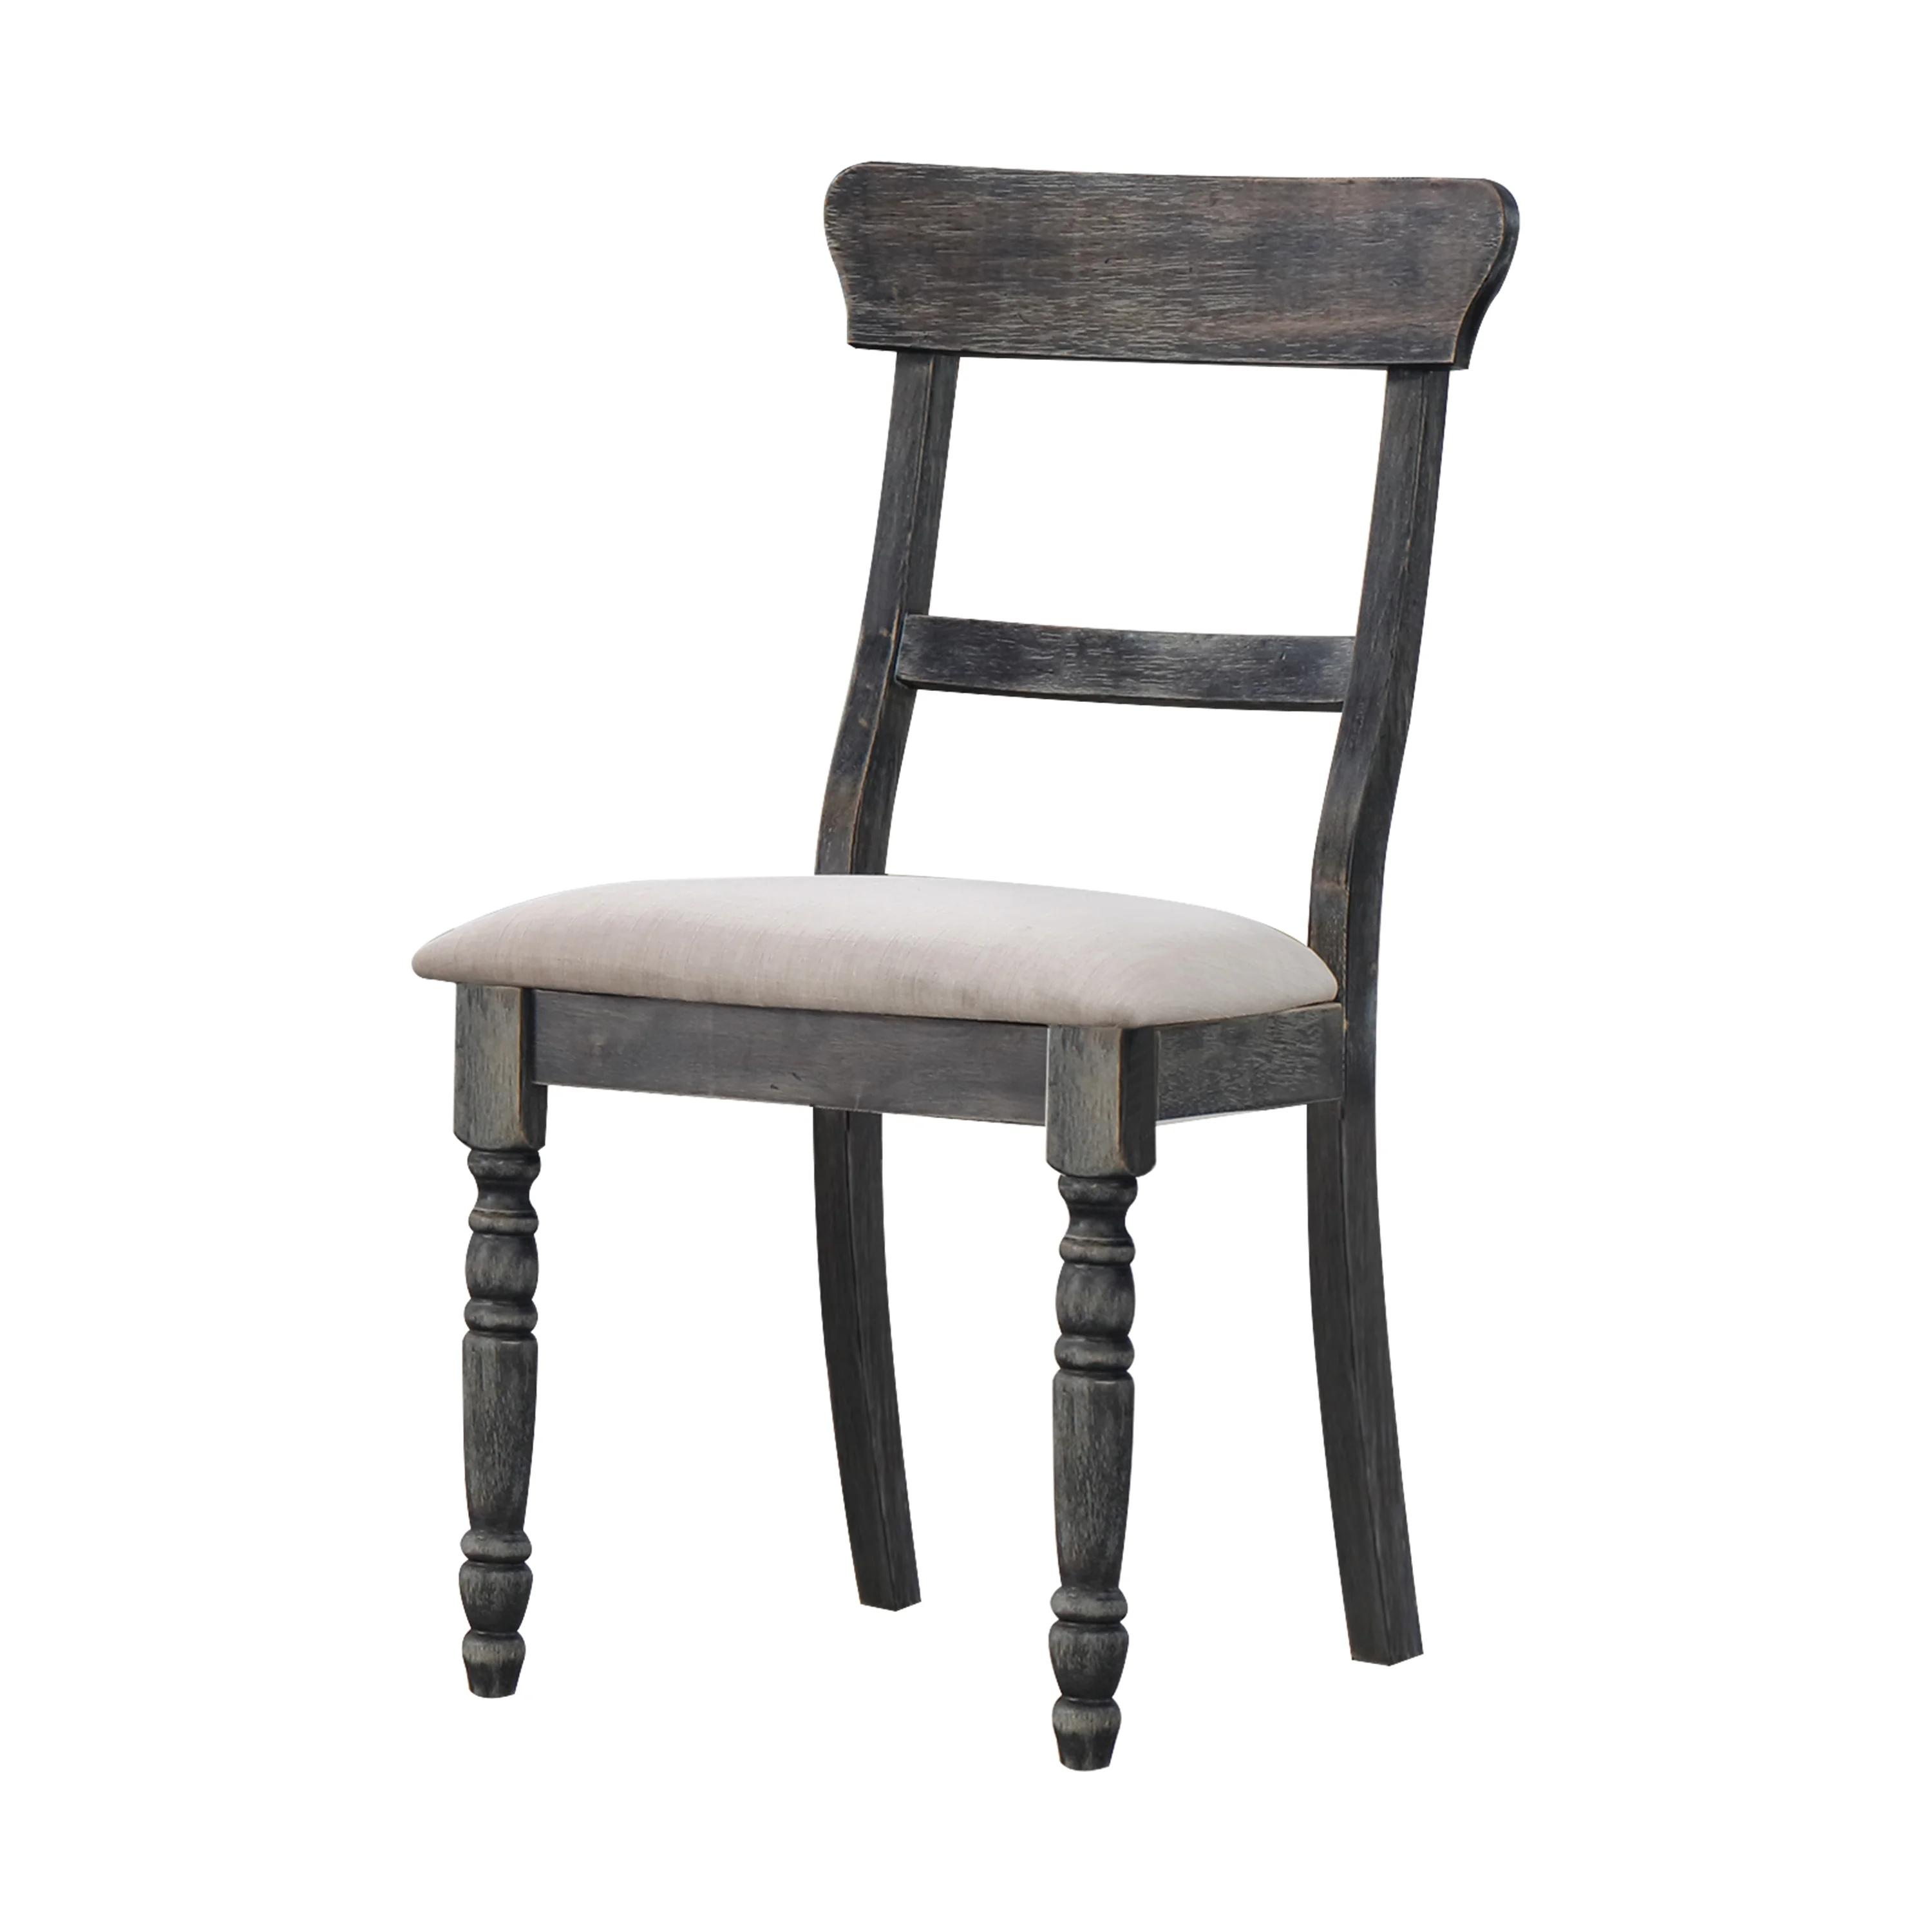 Rustic Side Chair Set Leventis 74642-2pcs in Gray Linen